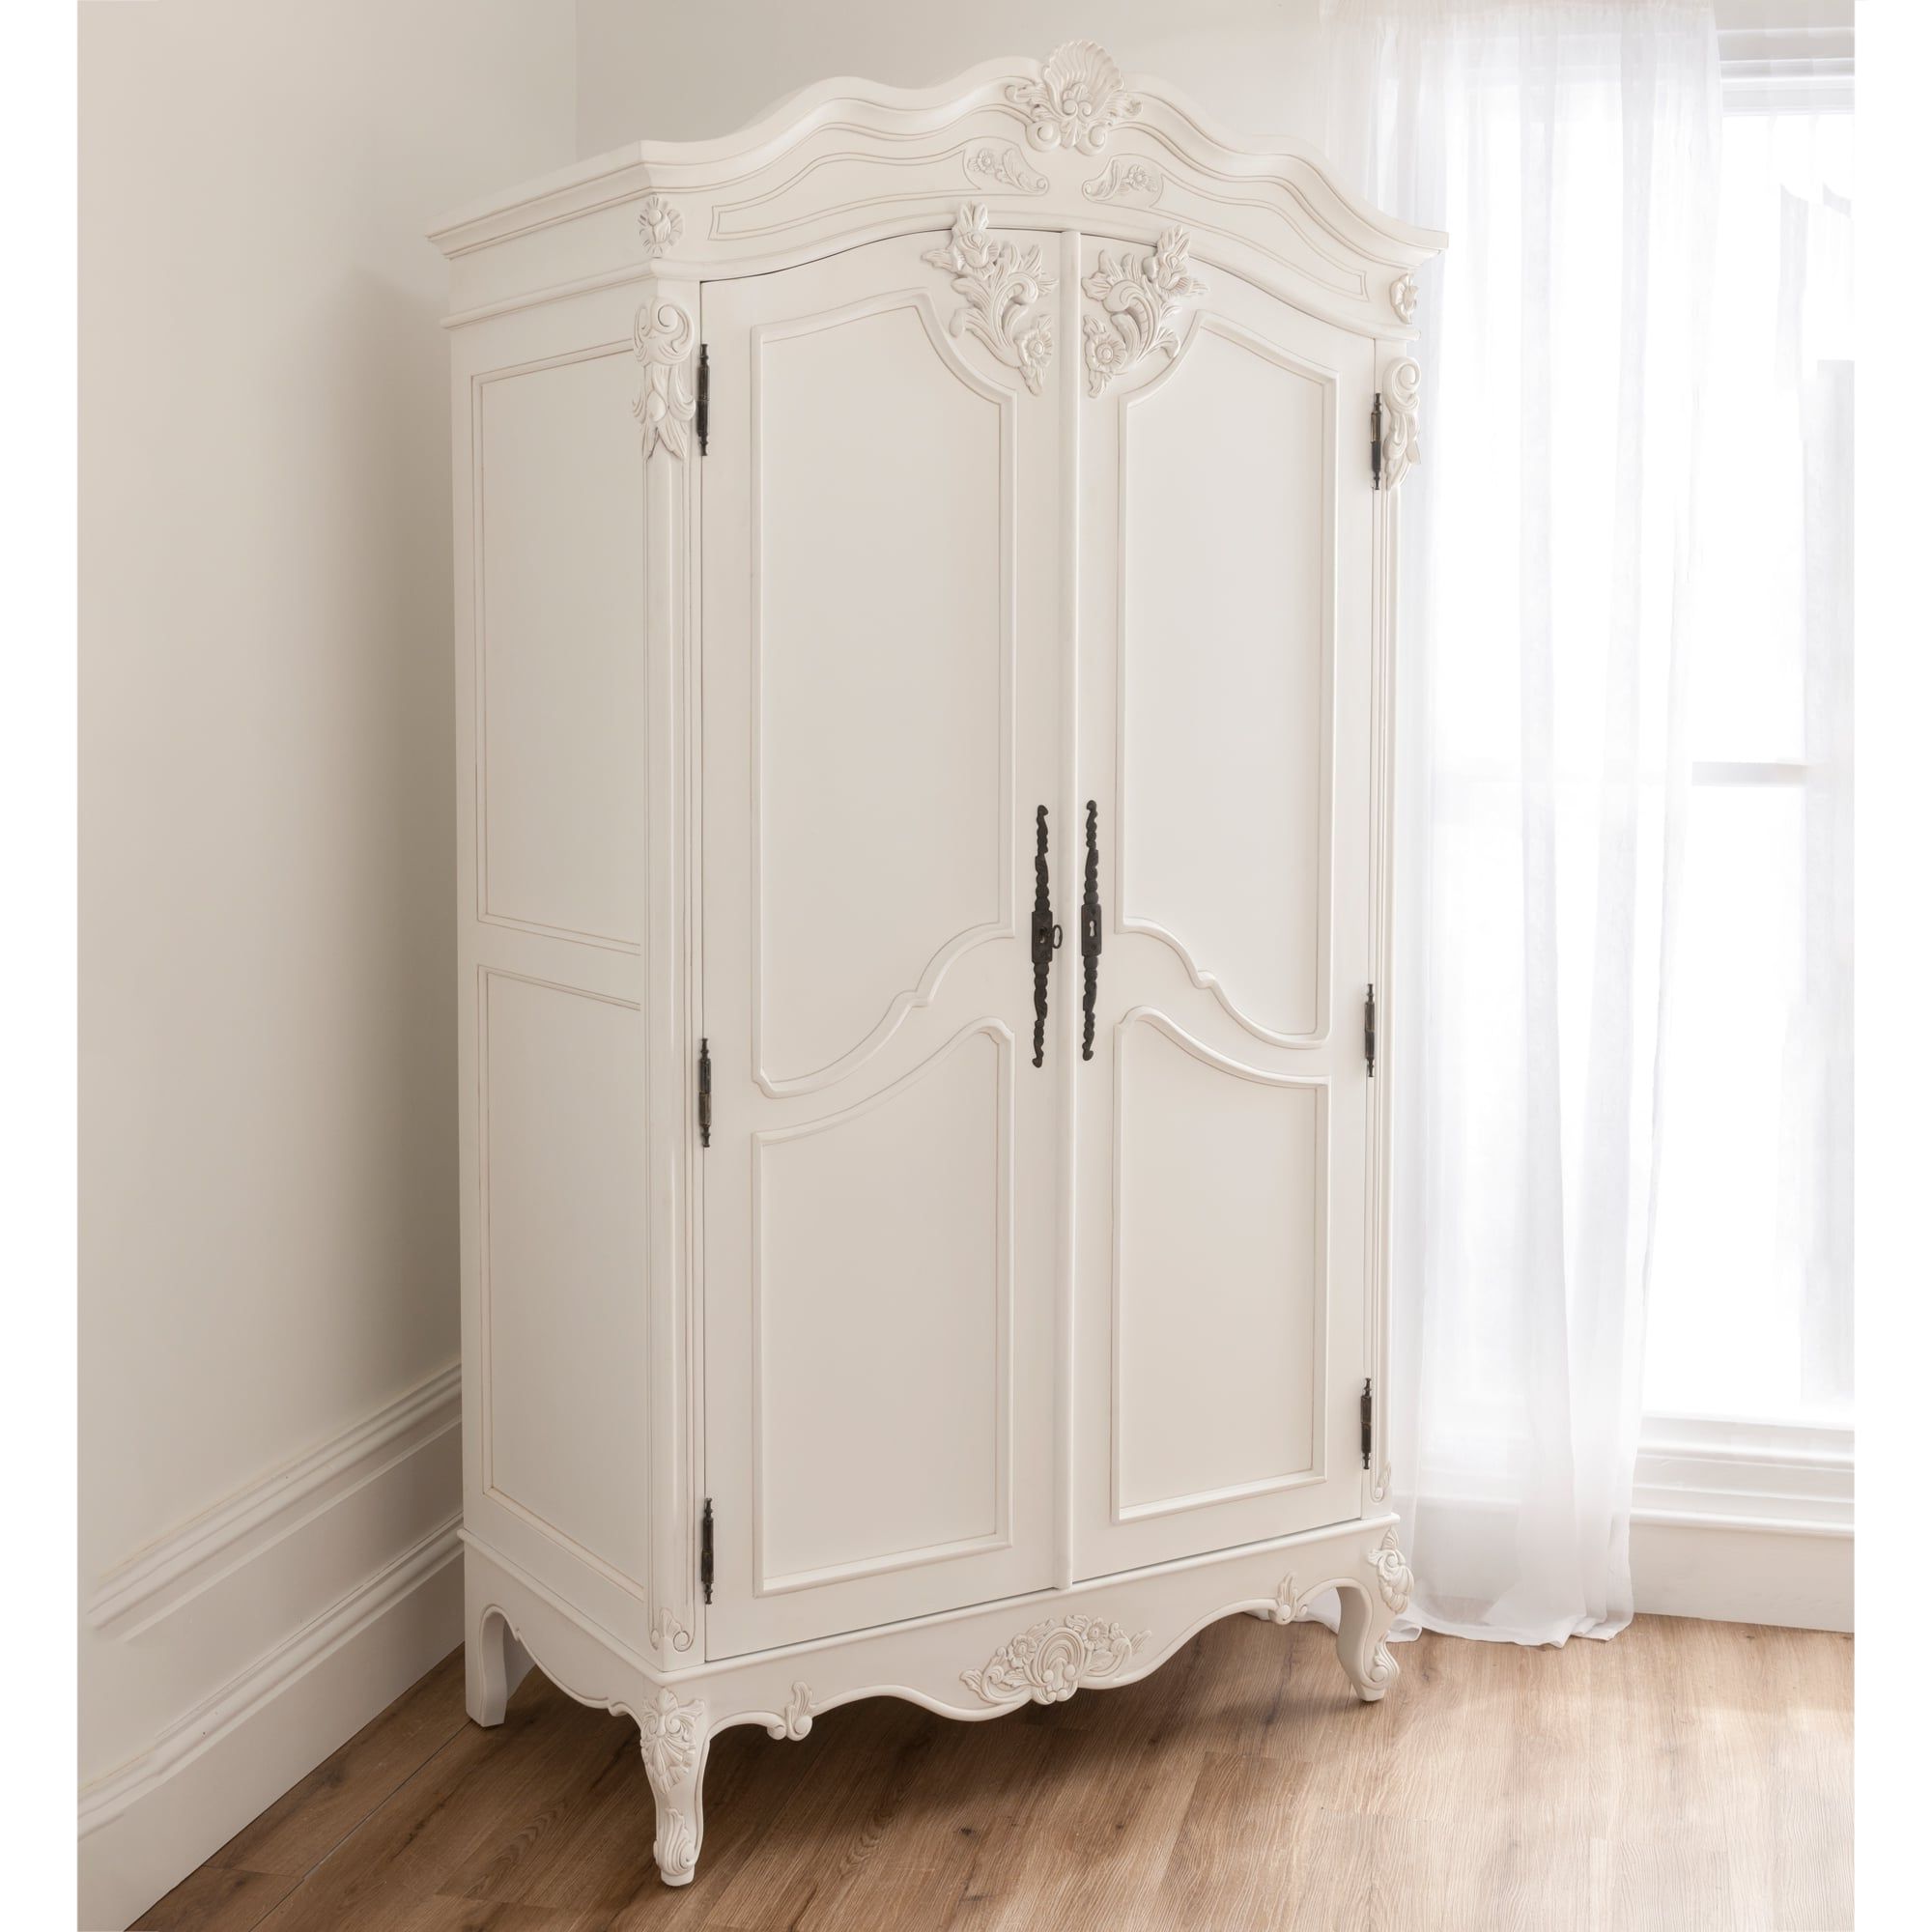 Baroque Antique French Wardrobe Is Available Online At Homesdirect365 Throughout French Armoire Wardrobes (View 6 of 20)